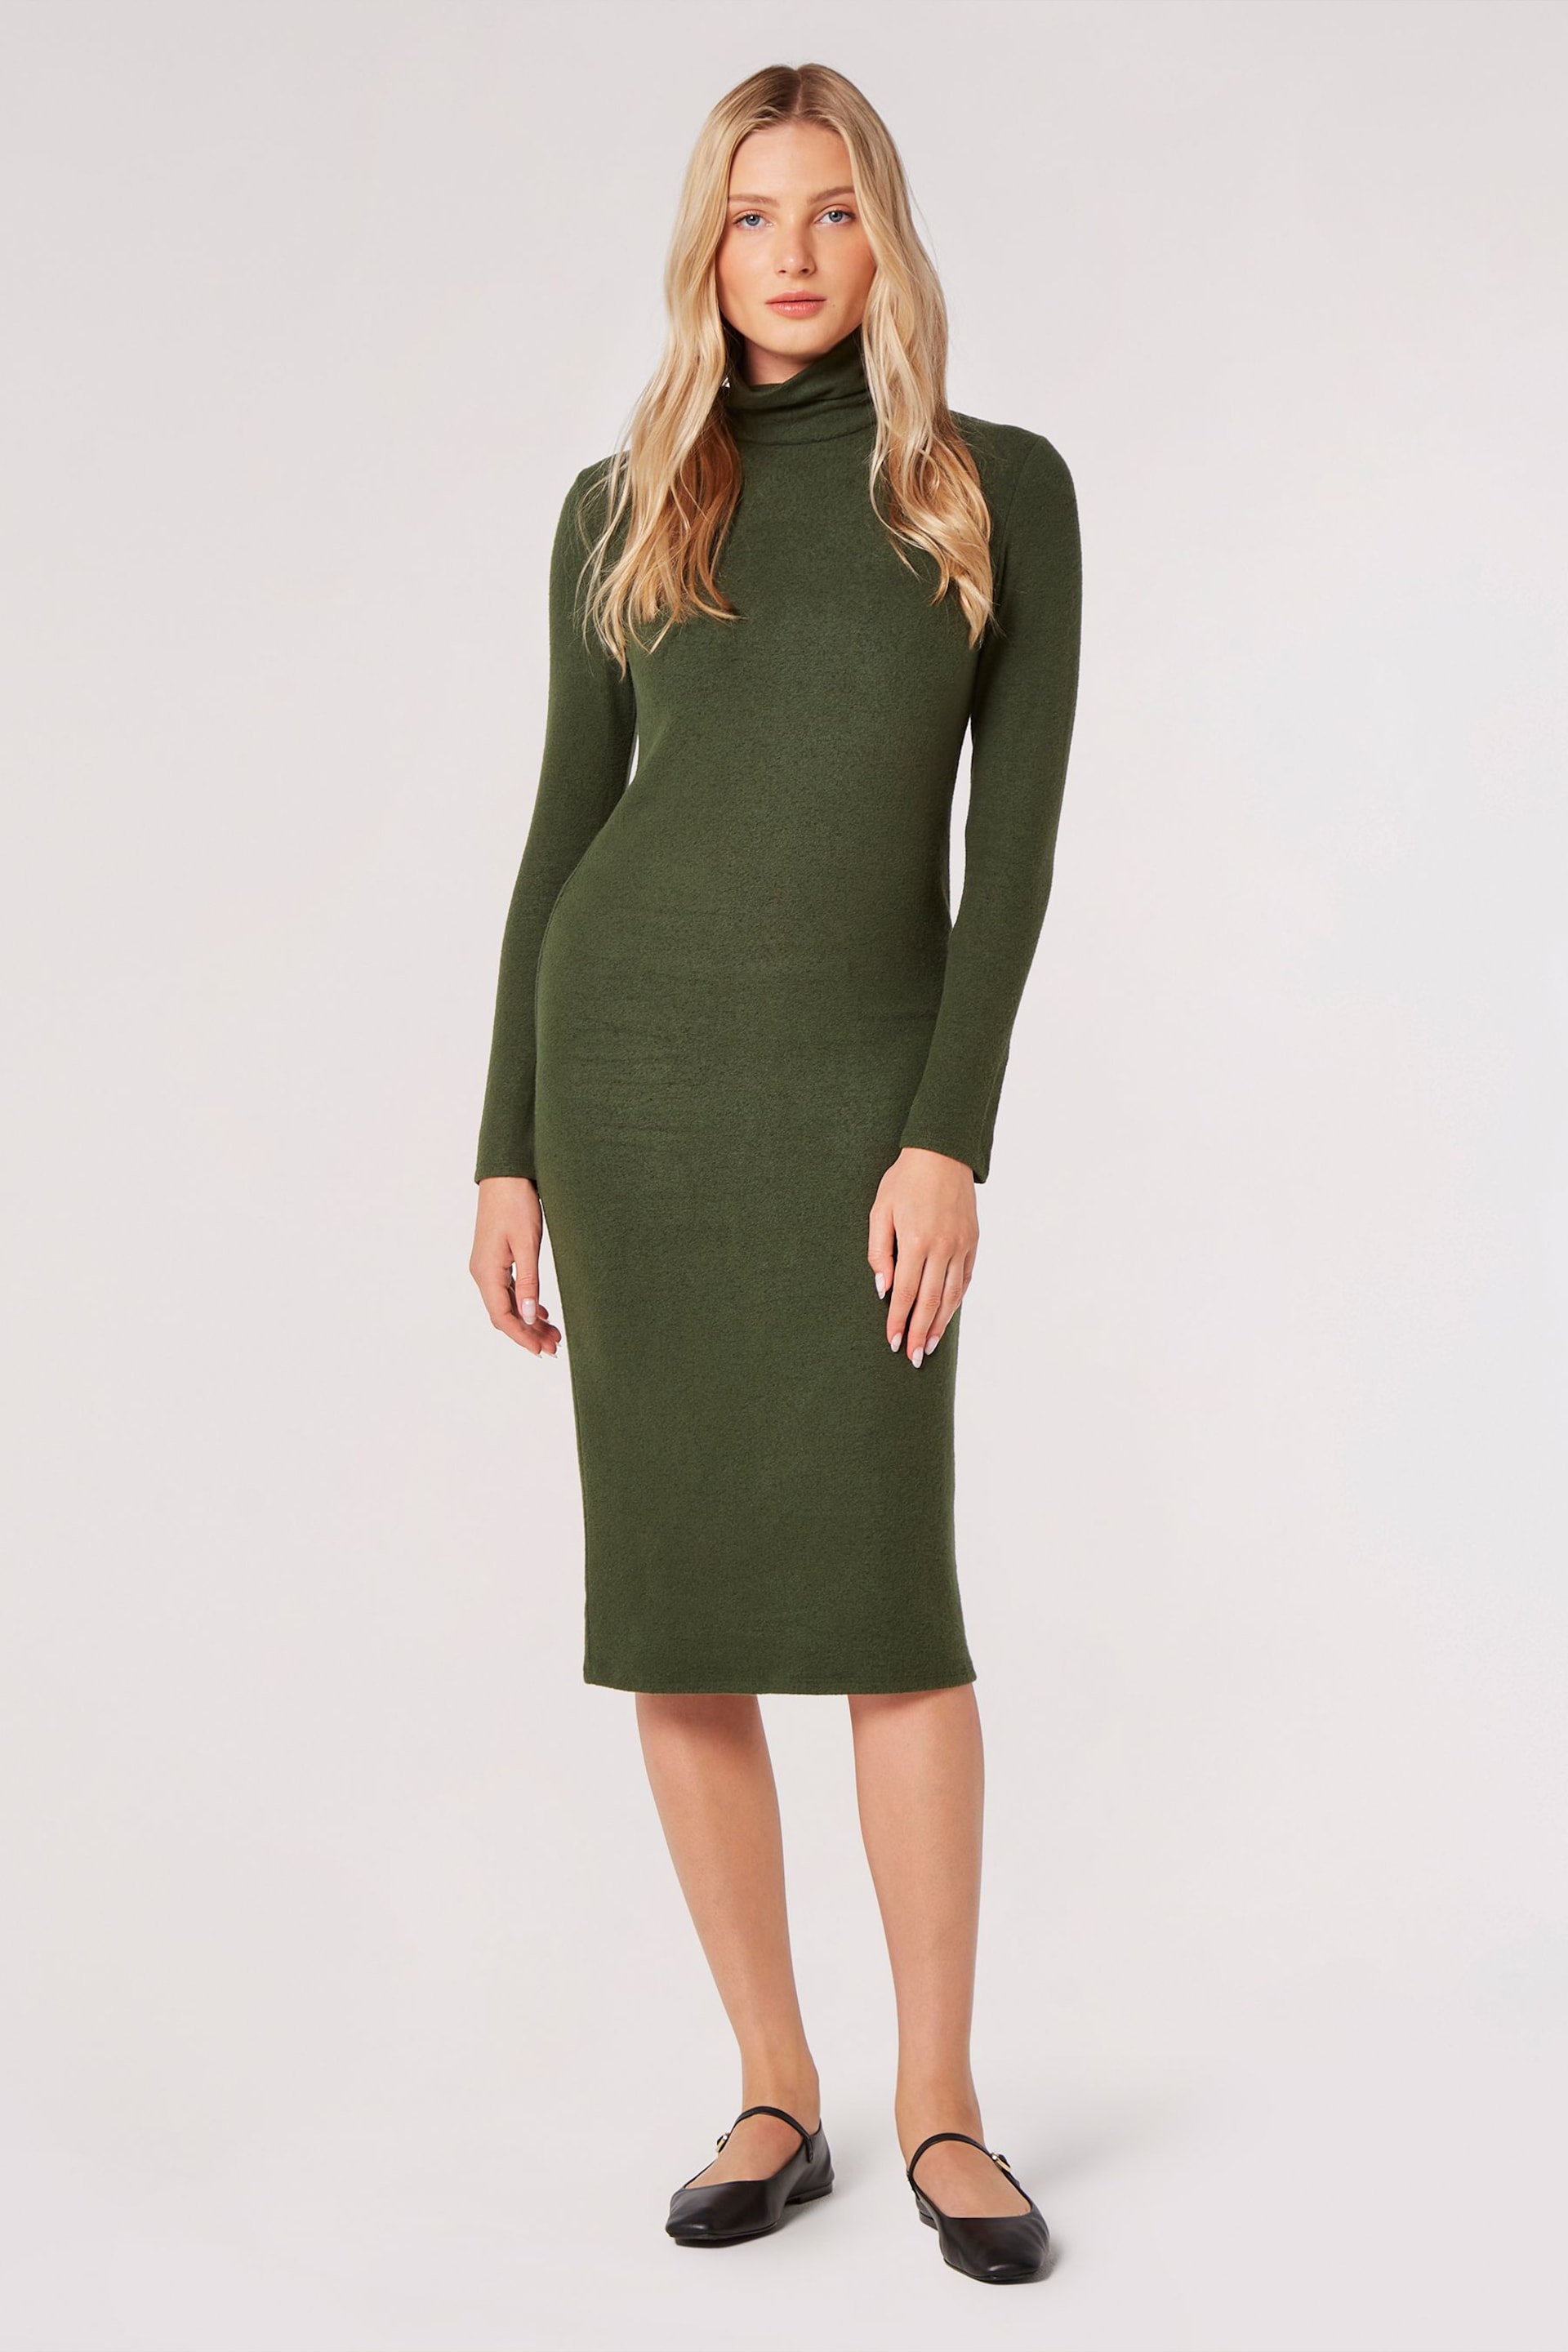 Apricot Green Roll Neck Column Dress - Image 1 of 4